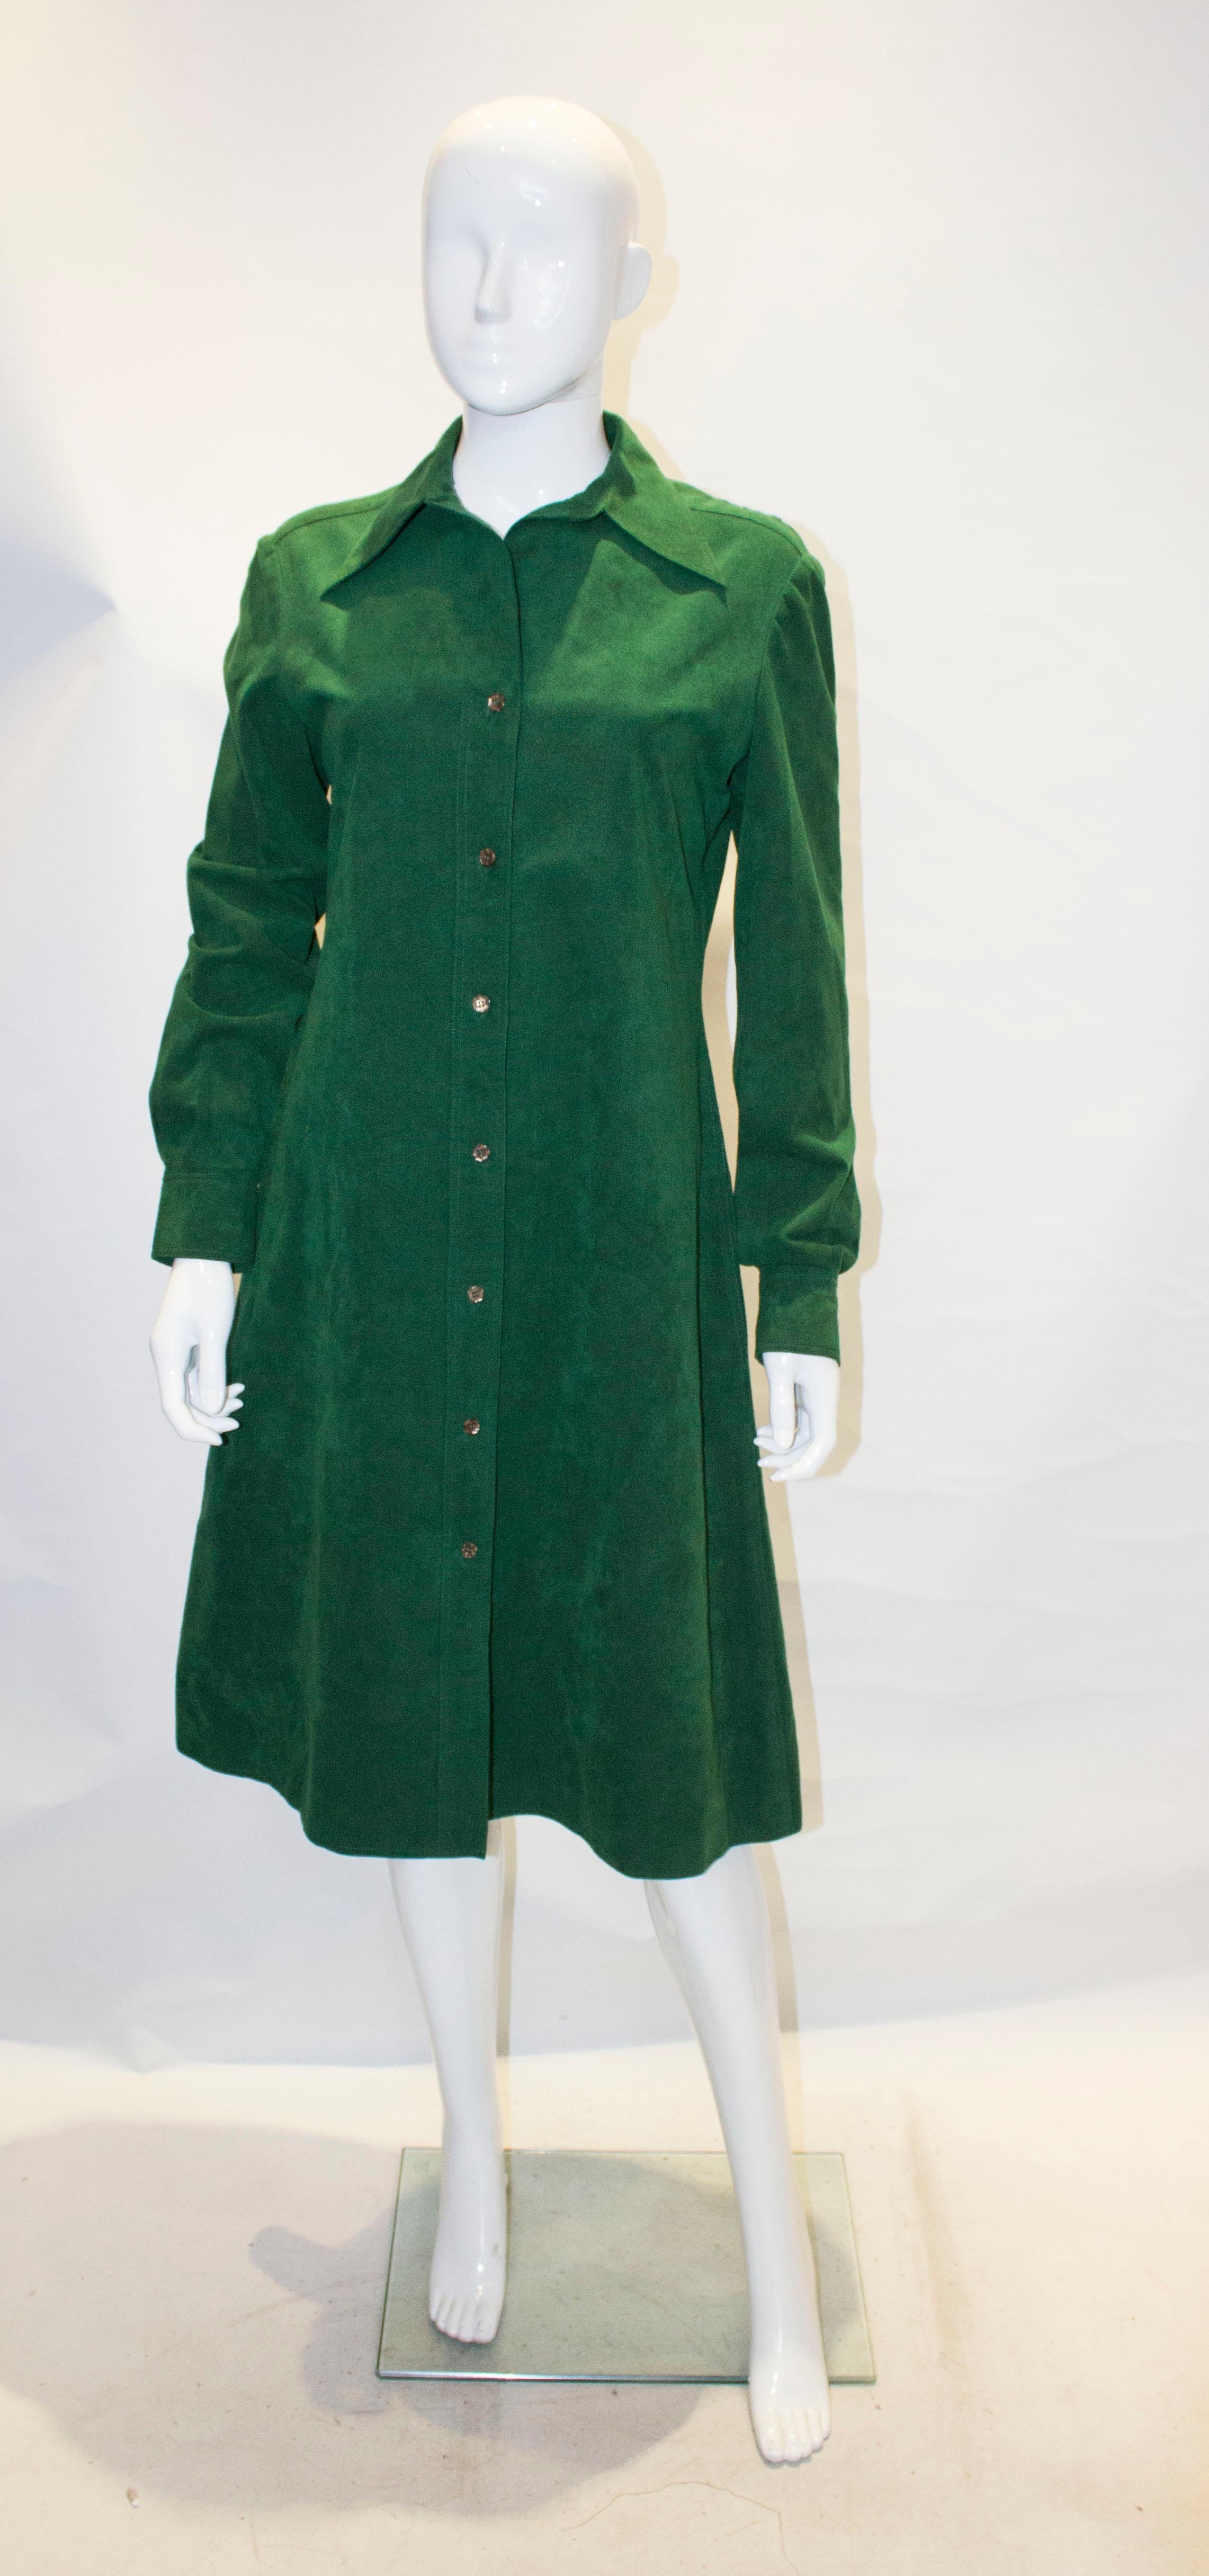 A stunning shirt dress in ultrasuede by Halston. It has a front button opening, pockets on either side and two button cuffs.